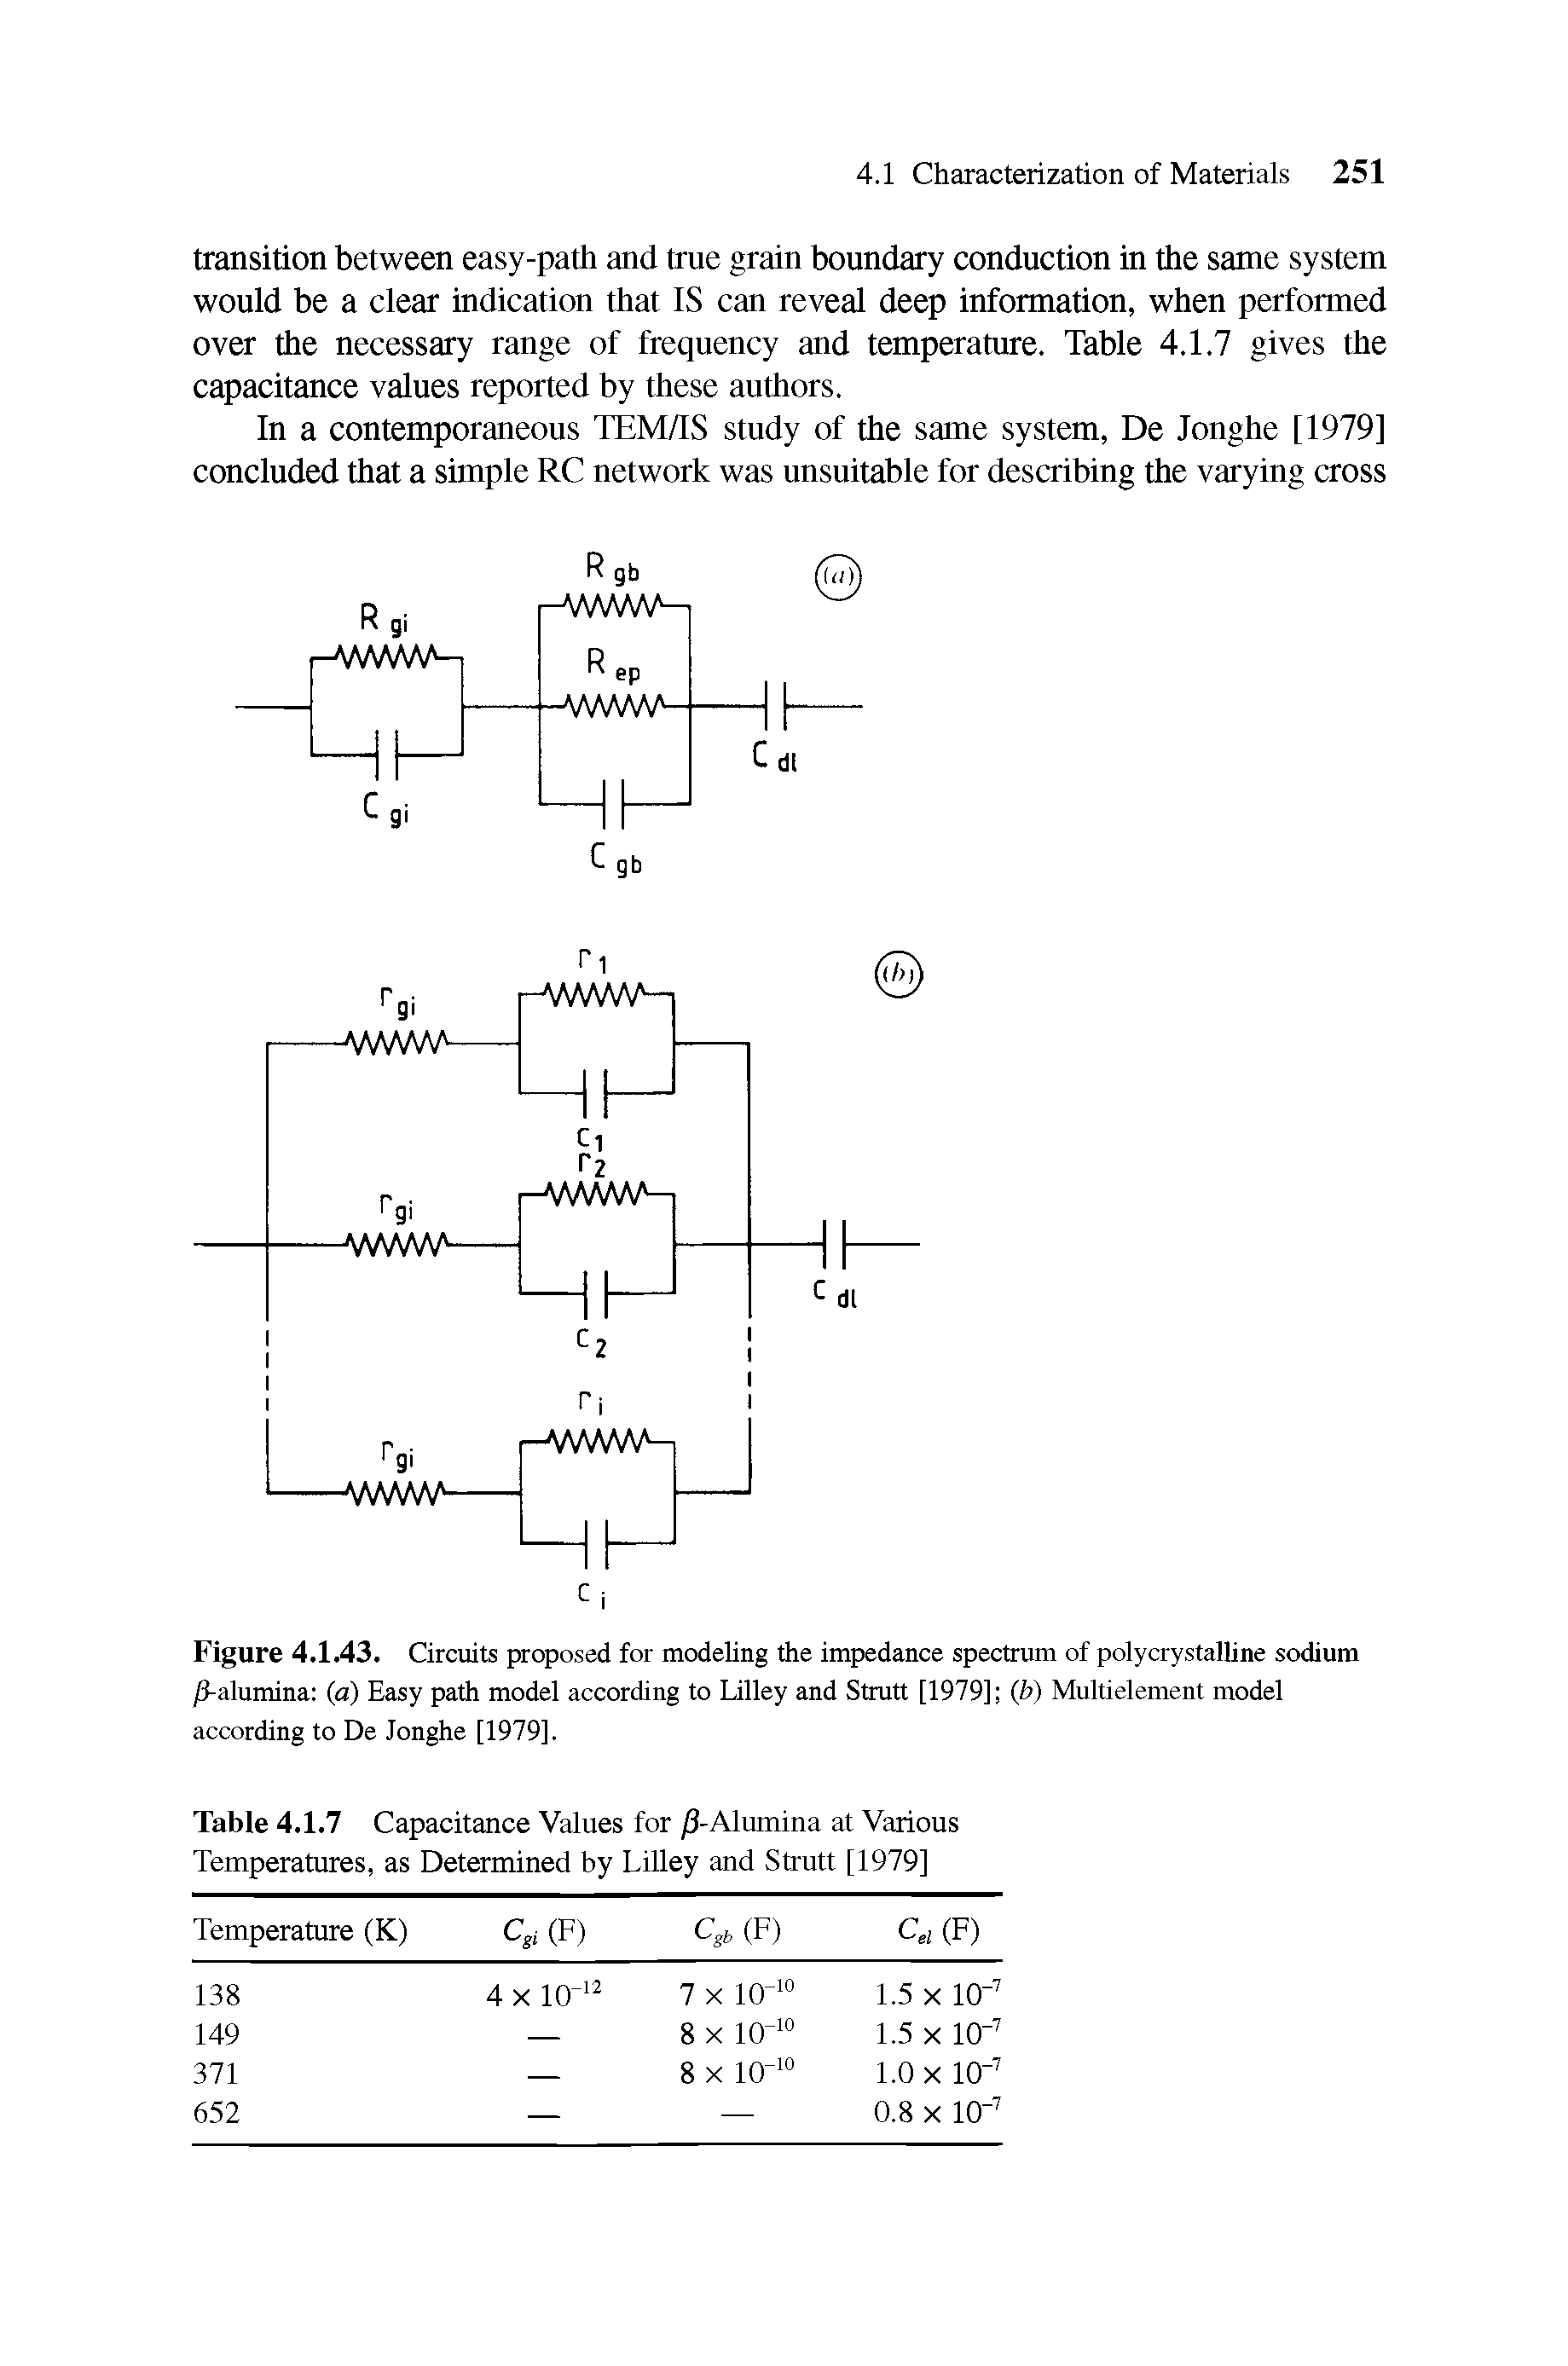 Figure 4.143. Circuits proposed for modeling the impedance spectrum of polycrystalline sodium )8-alumina (a) Easy path model according to Lilley and Strutt [1979] (b) Multielement model according to De Jonghe [1979].